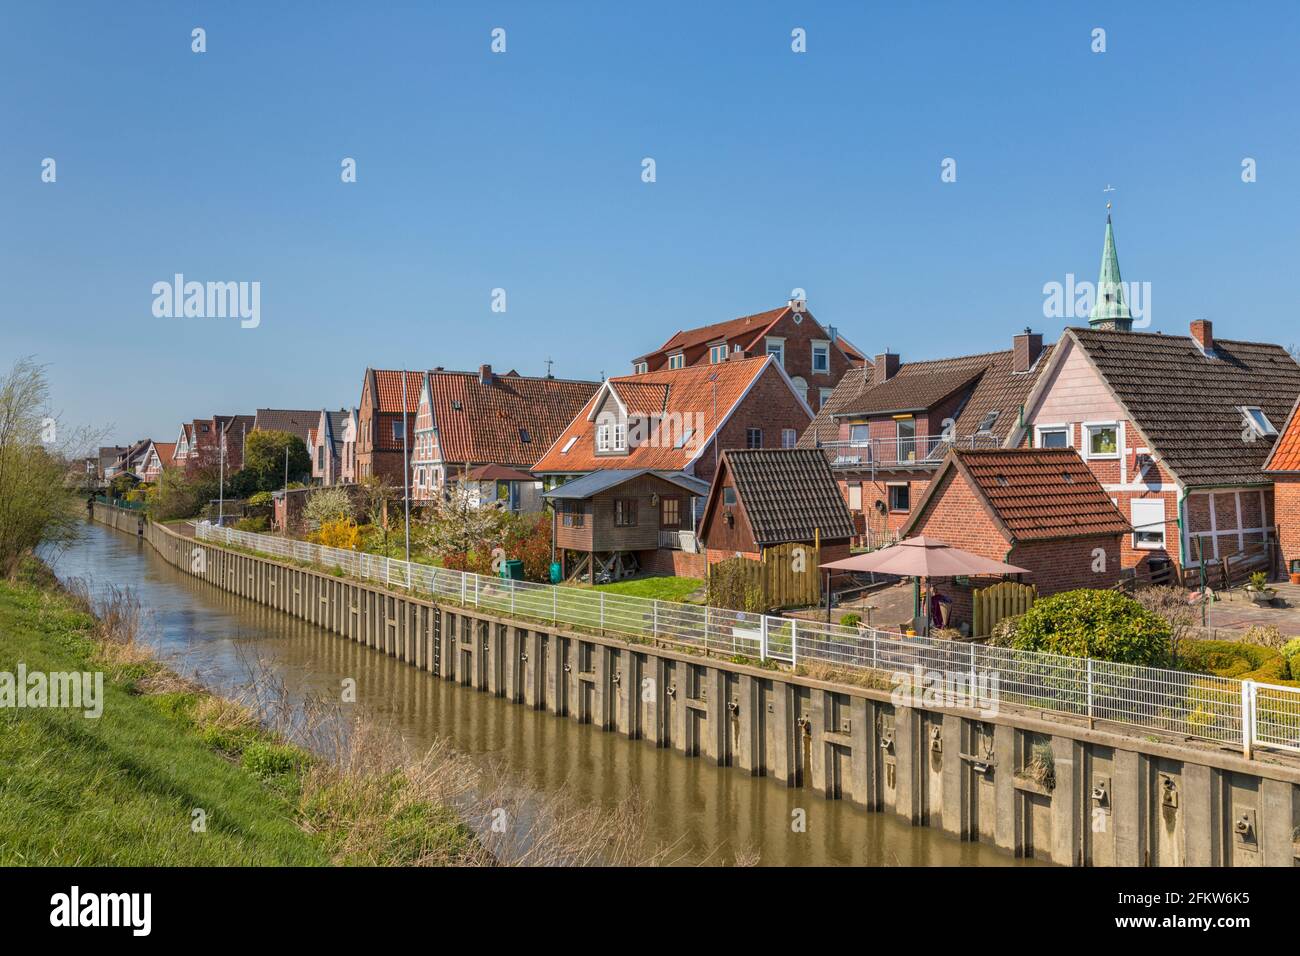 Lühe river flowing through the village of Steinkirchen in the Altes land region of Lower Saxony, Gemany Stock Photo